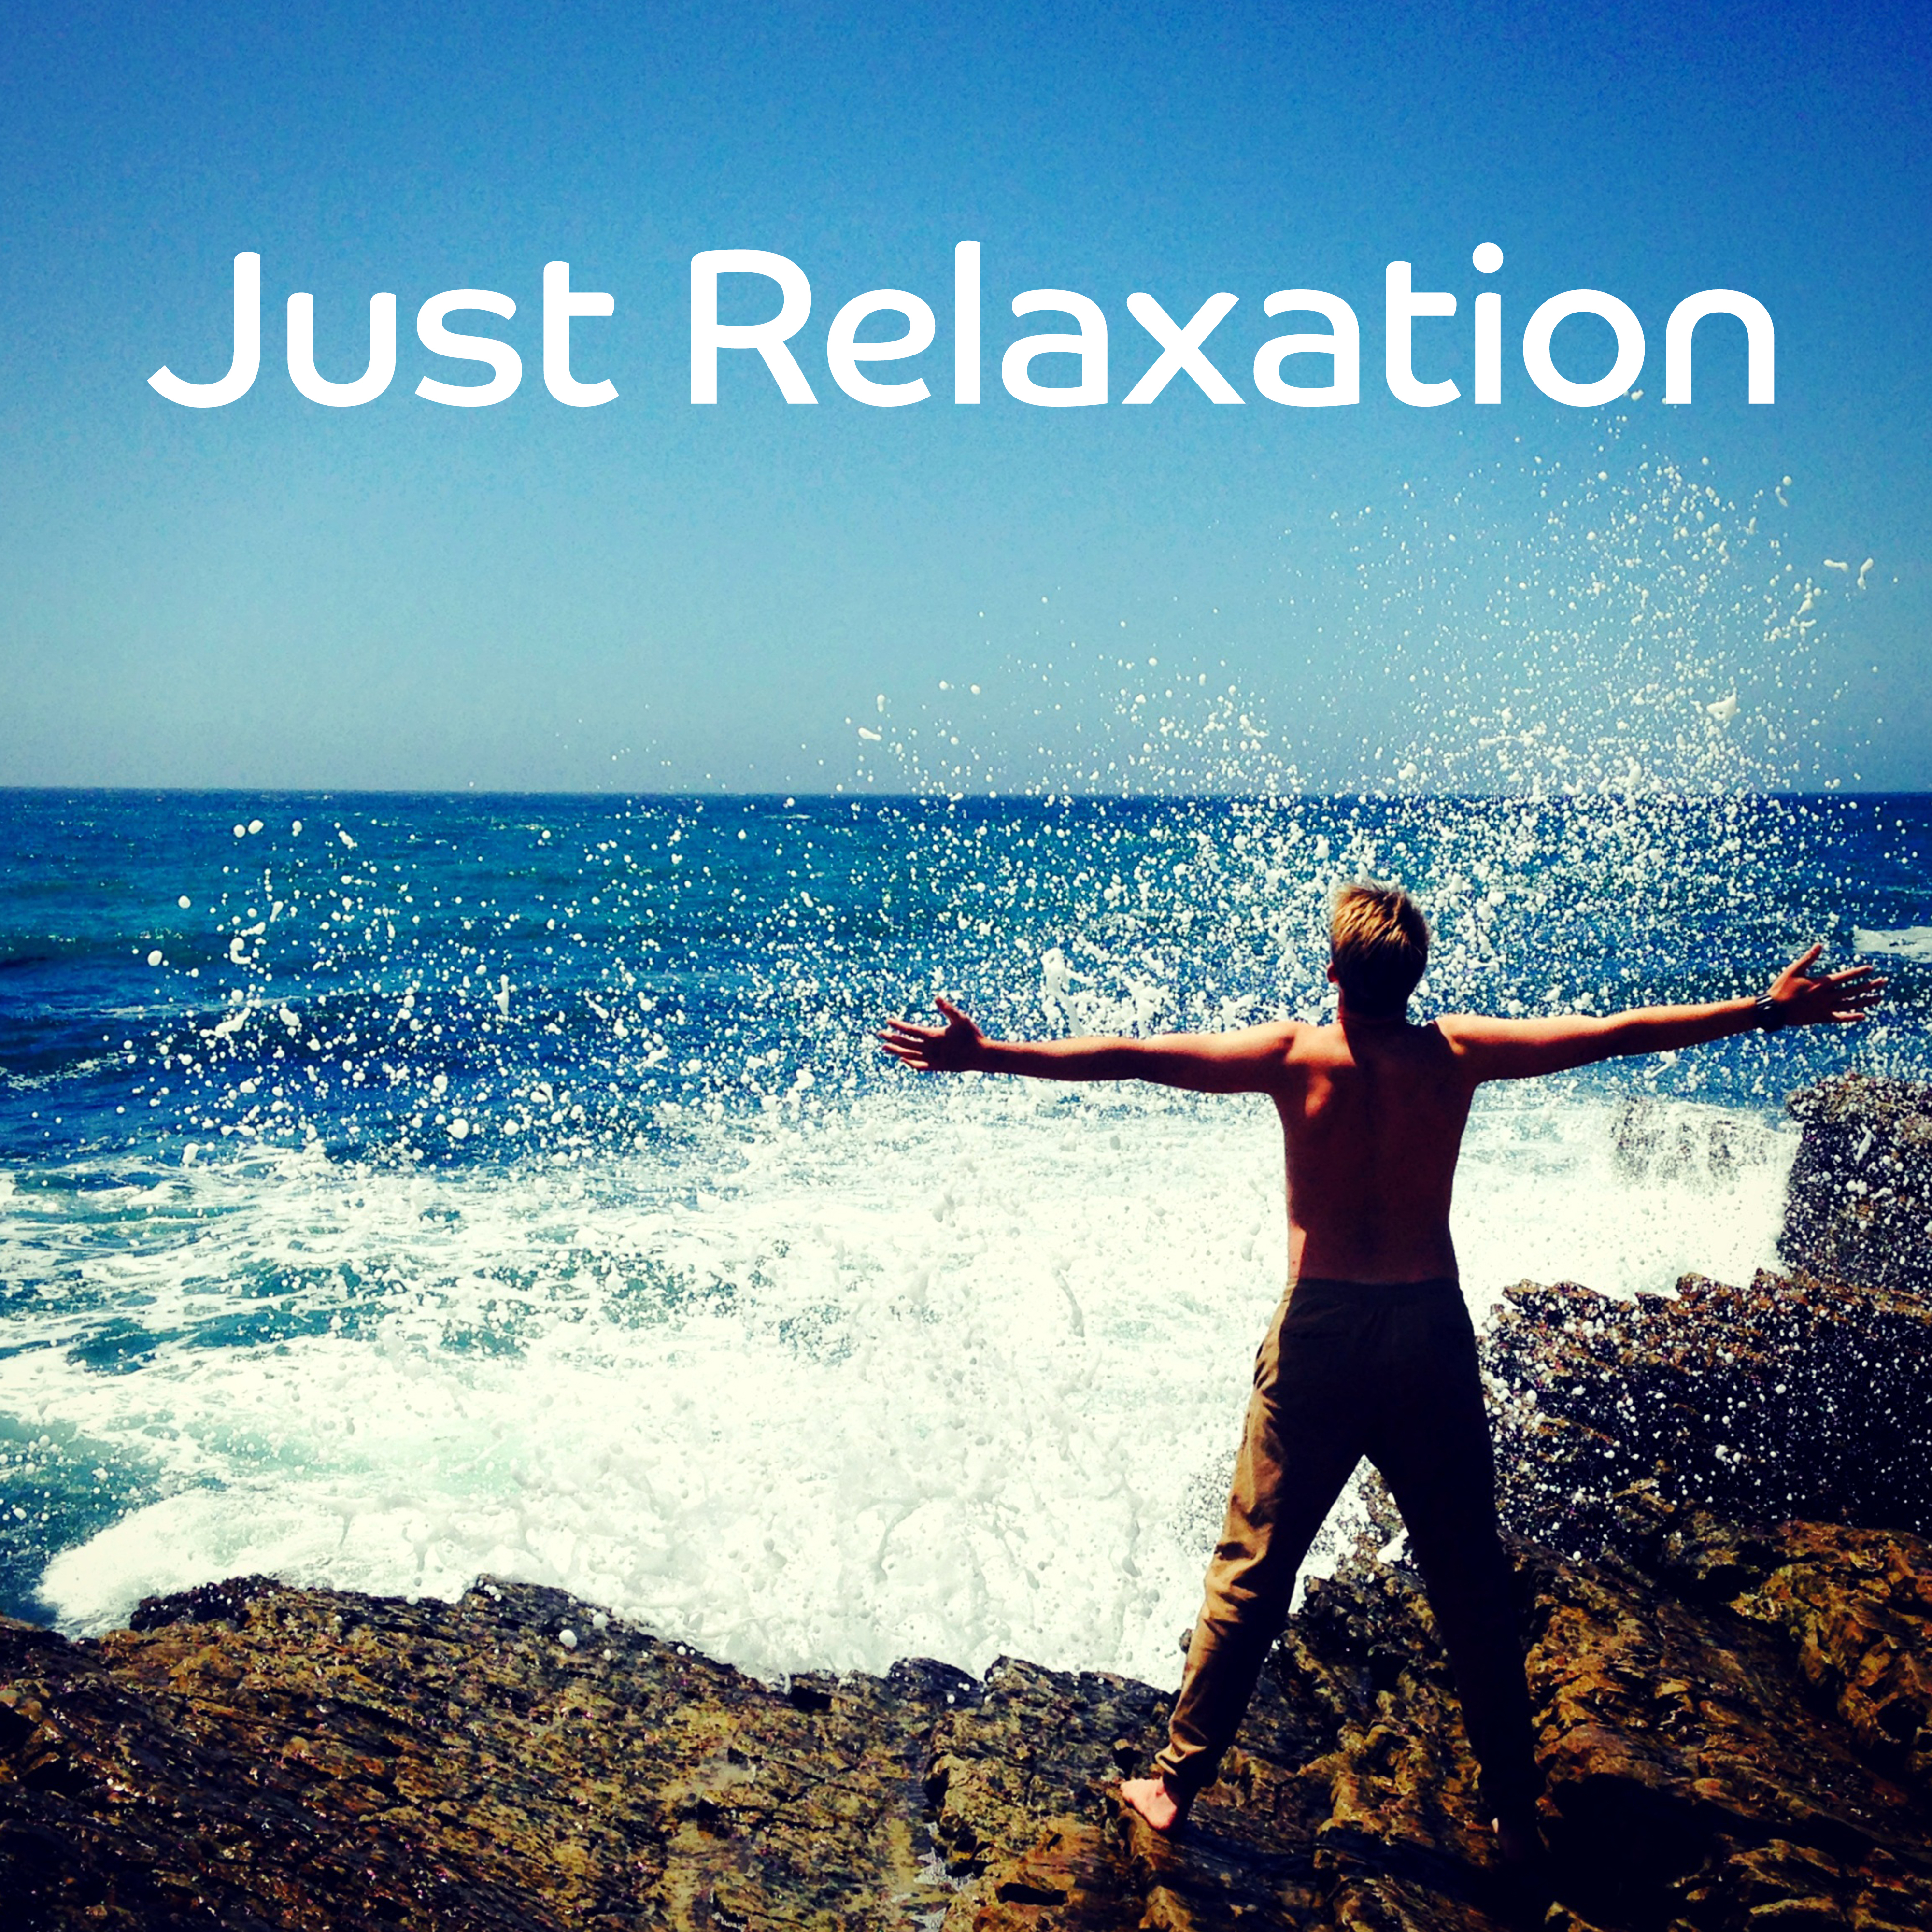 Just Relaxation – Nature Sounds to Relax, New Age Music, Wellness Relaxation, Healing Sounds for Spa Treatments